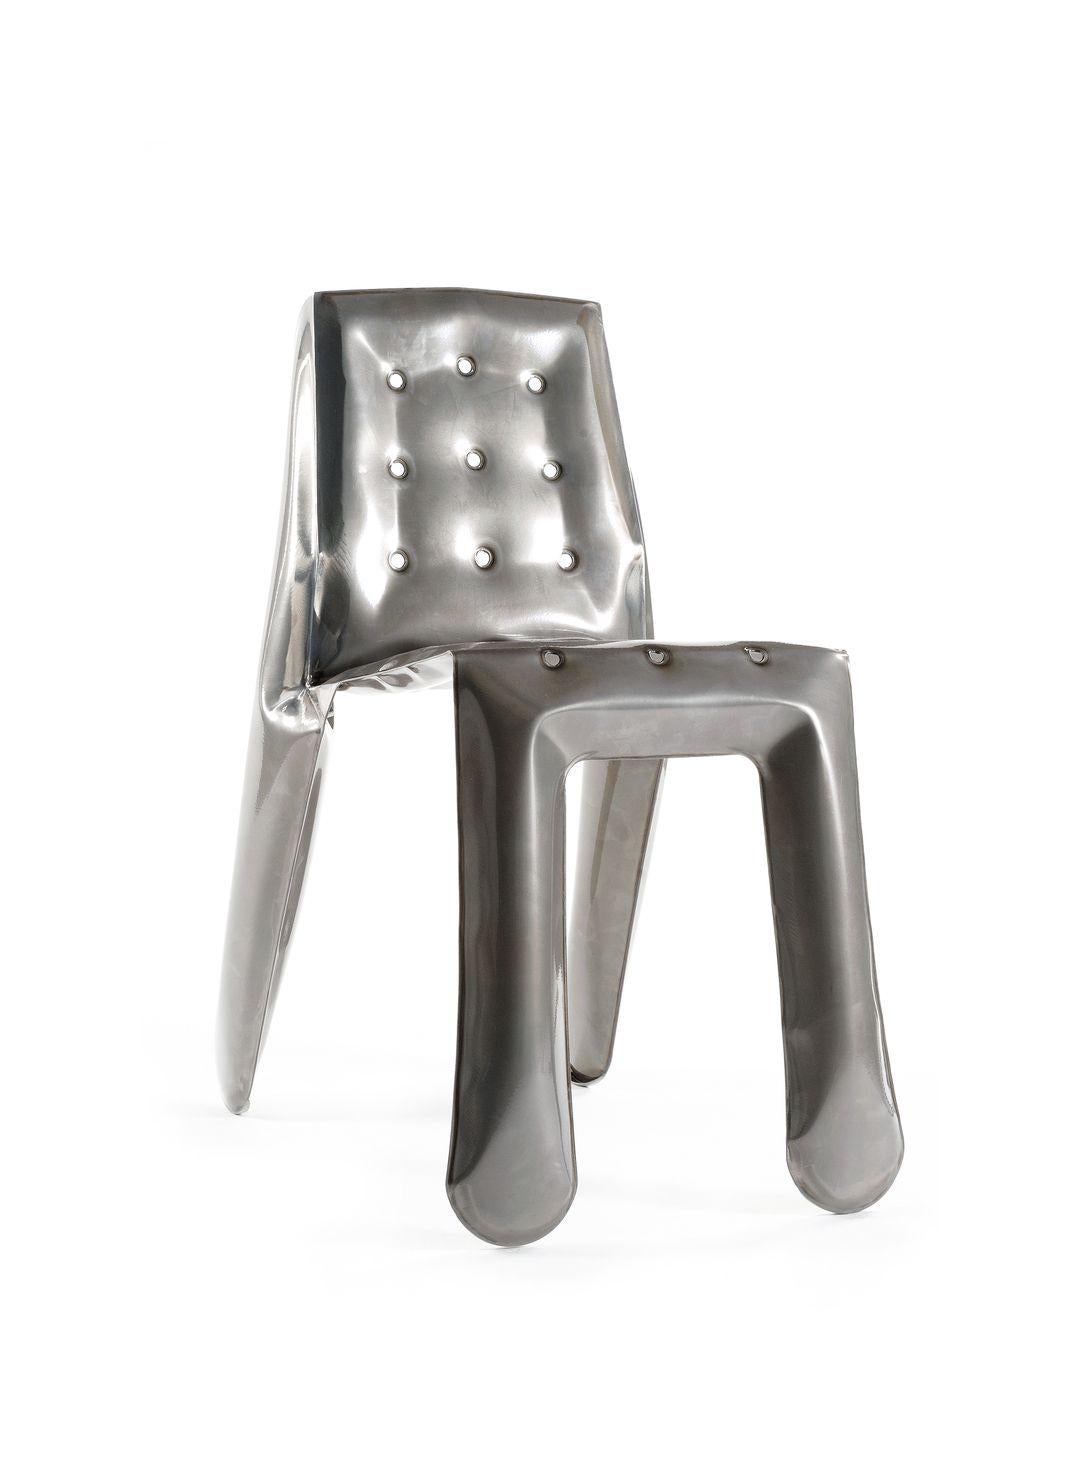 Chippensteel 1.0 is fine example of blending FiDU process and craftsmanship. The 2D form is cut from metal sheet and goes through welding and inflating, becoming three dimensional functional chair. The finishing touch by designer and craftsman gives